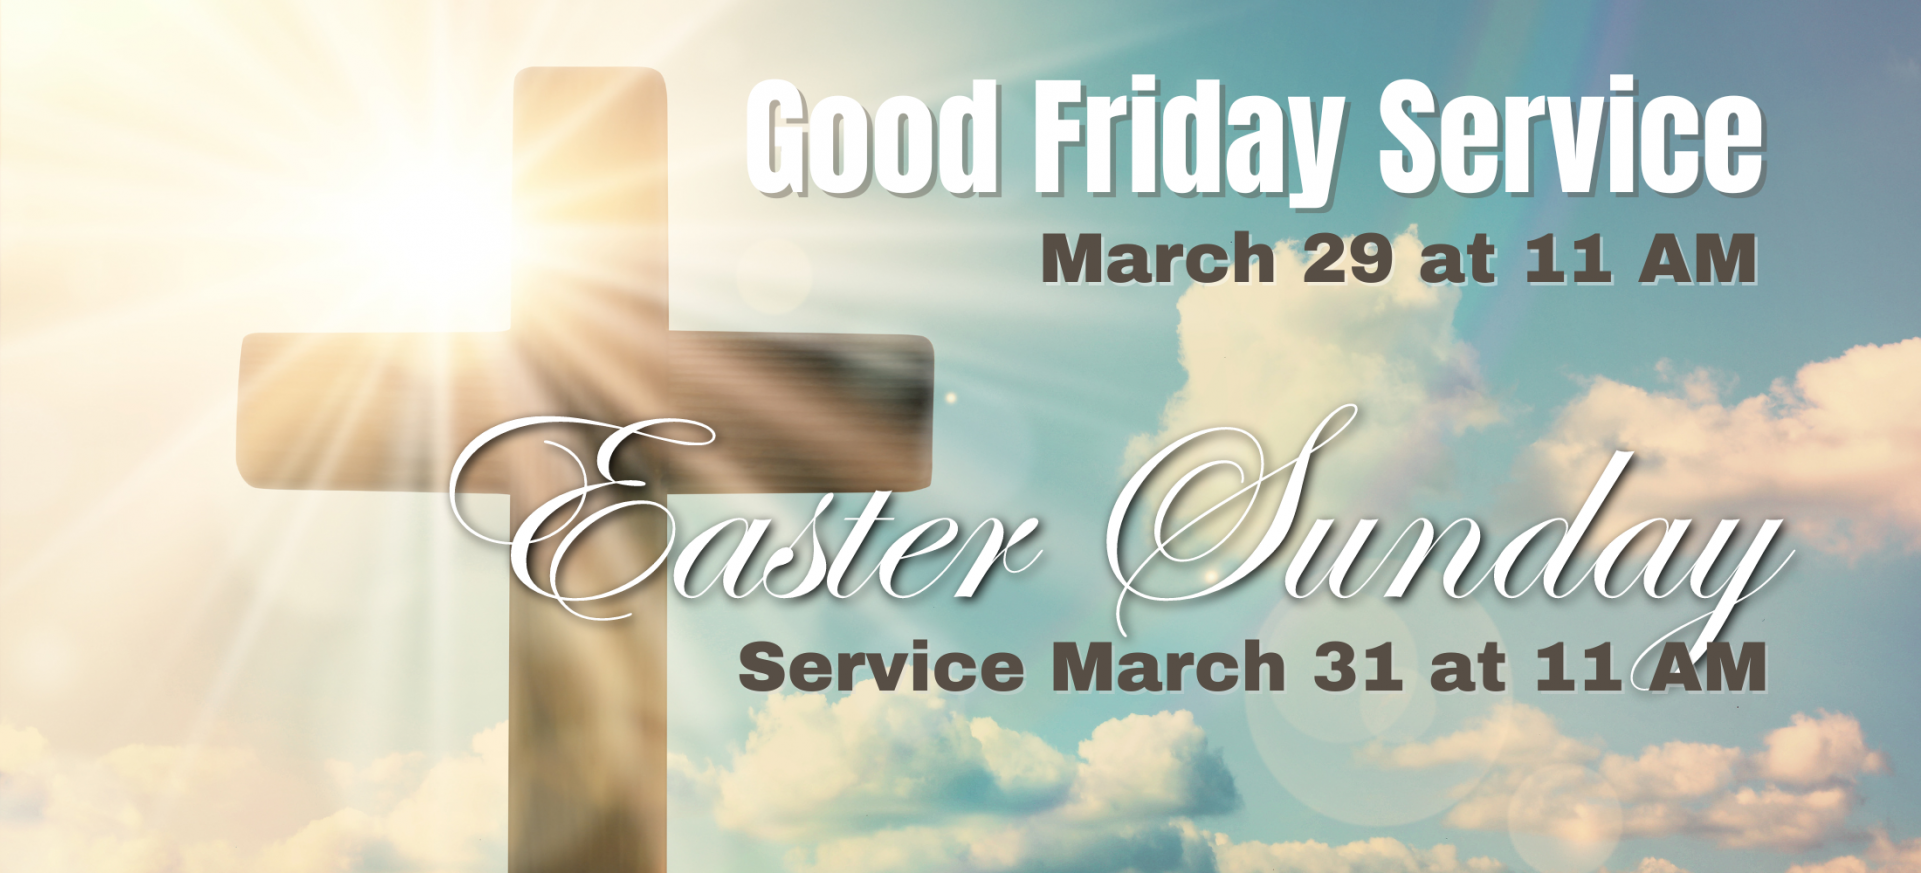 Good Friday Service March 29 at 11AM, Easter Sunday Service at 11 AM